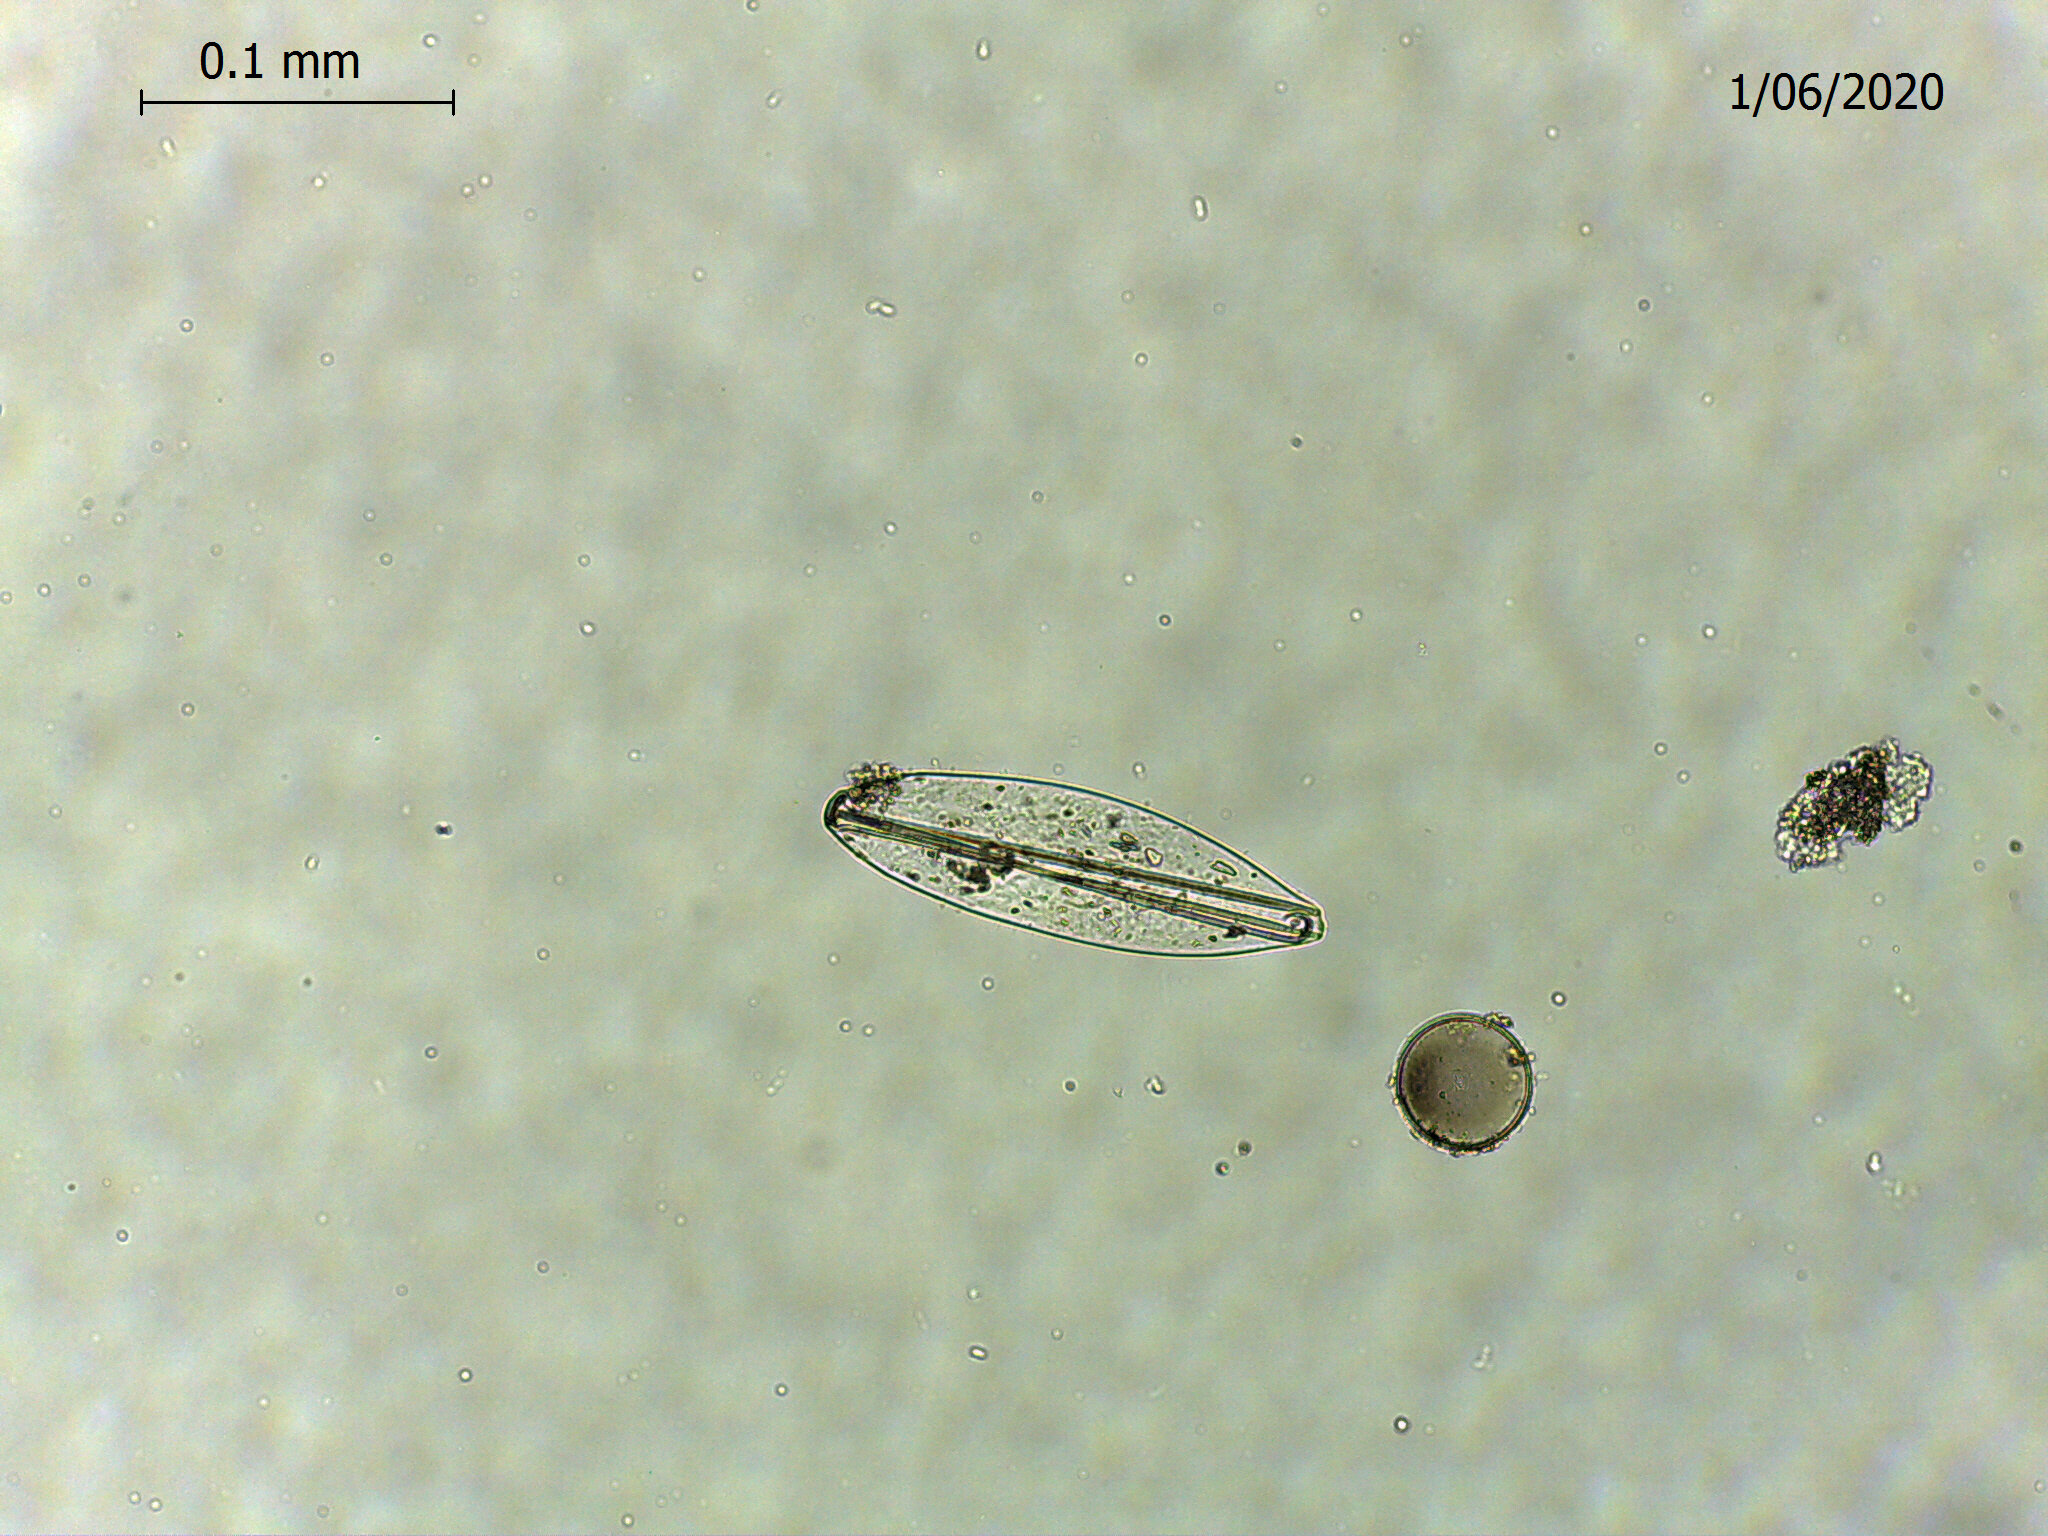  Plankton found off White Bluff. For the full story see our news page here: https://www.thewhitebluffproject.co/news/2021/1/16/rare-find-inspires-art-project 